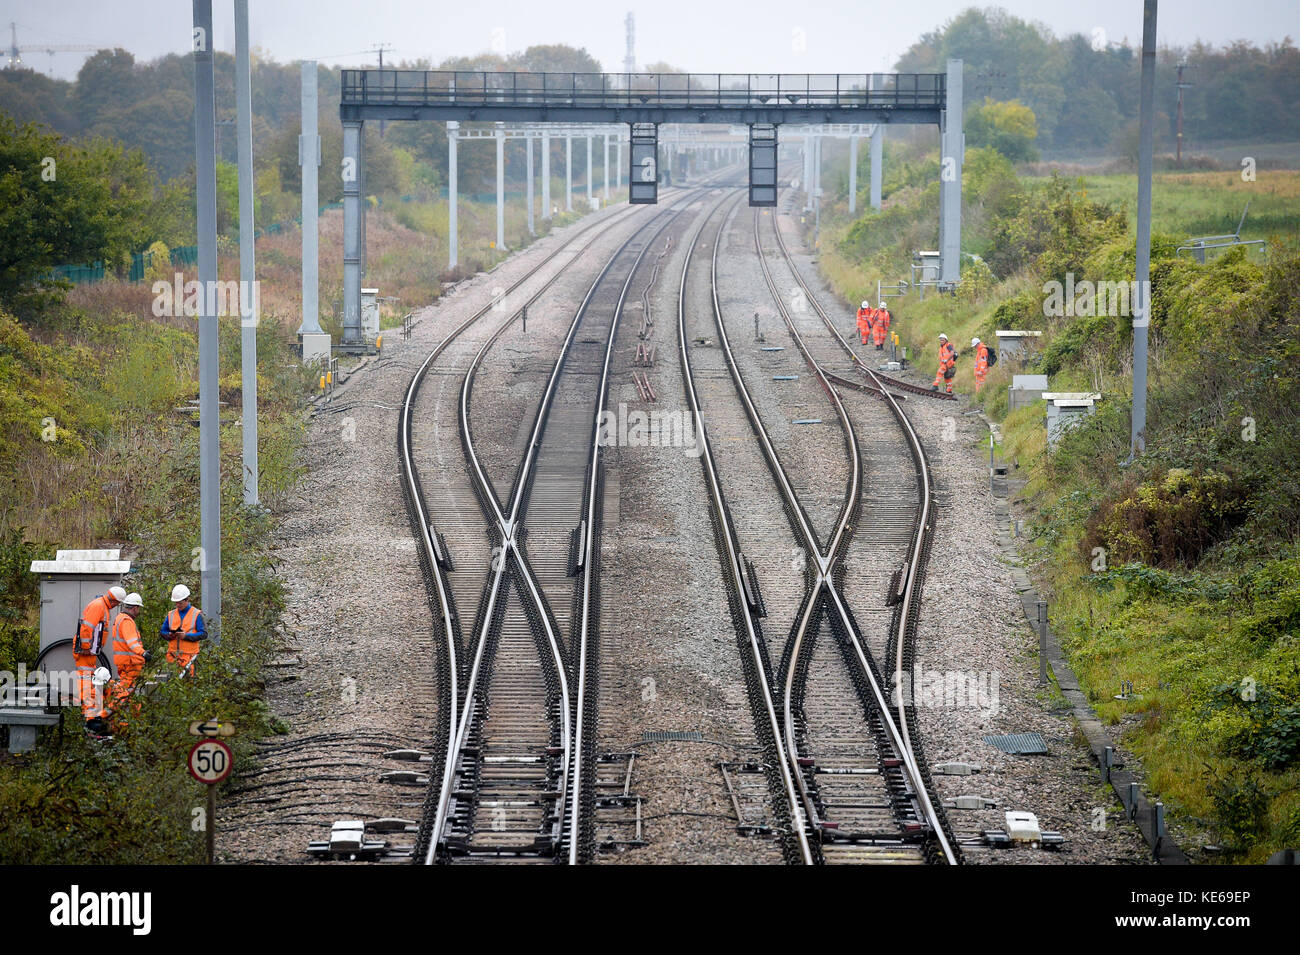 Railway workers on the un-electrified part of the Great Western mainline railway at Steventon, Oxfordshire, where a Grade II-listed bridge over the B4017 is preventing full electrification of the line as it is too low. Stock Photo